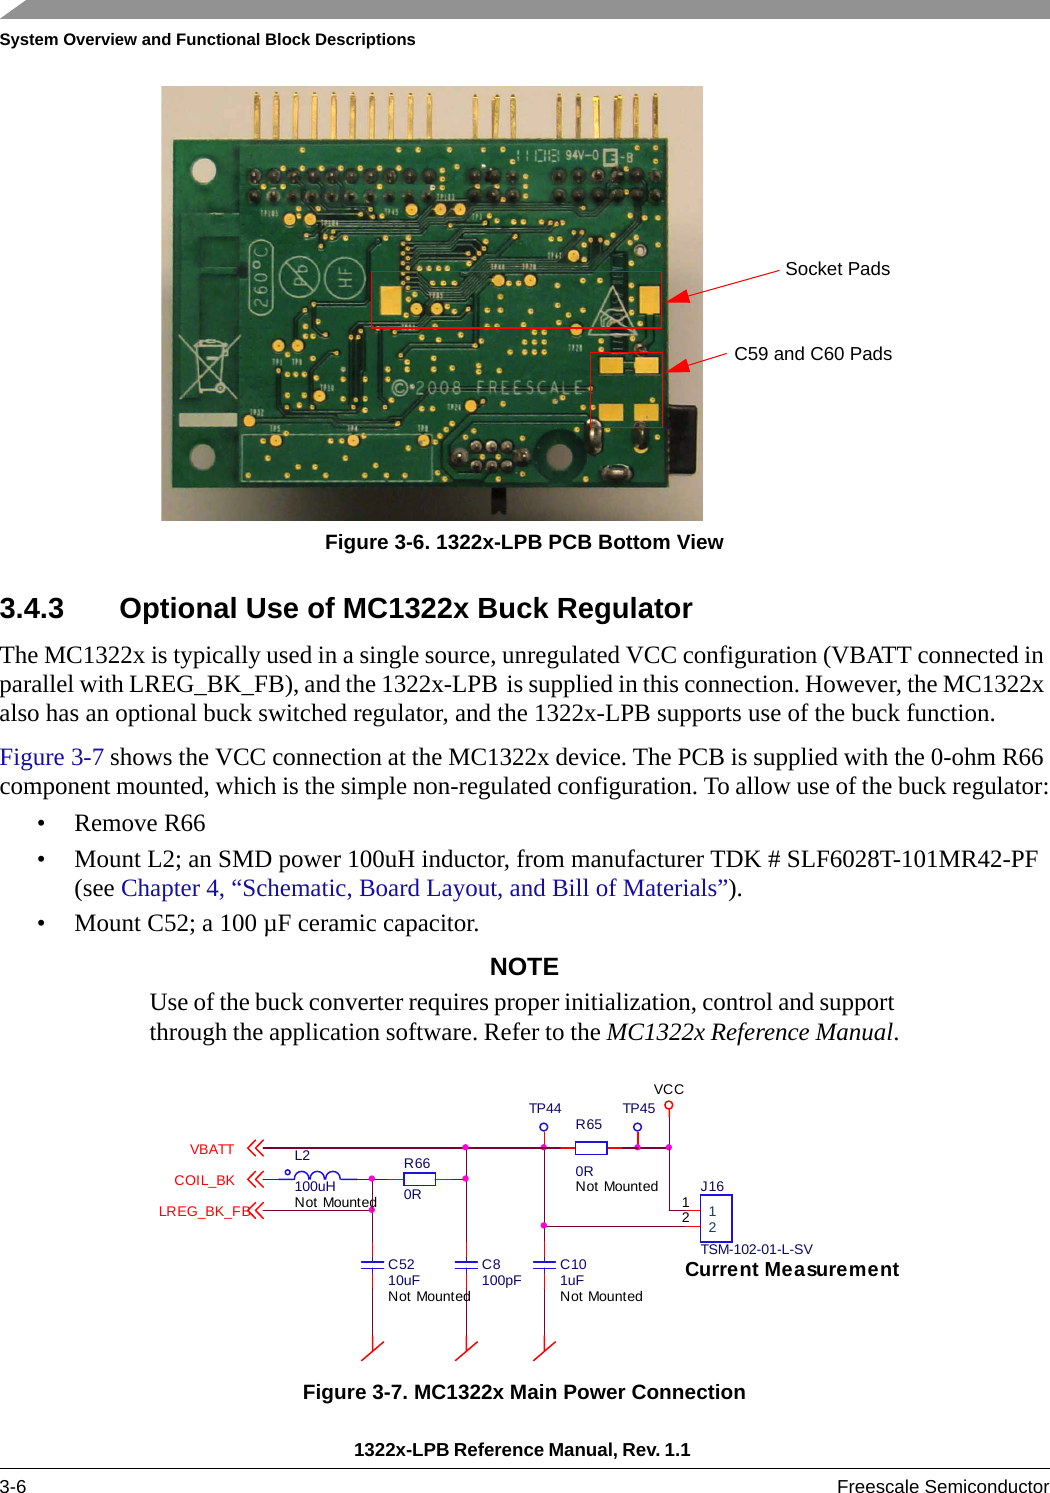 System Overview and Functional Block Descriptions1322x-LPB Reference Manual, Rev. 1.1 3-6 Freescale SemiconductorFigure 3-6. 1322x-LPB PCB Bottom View3.4.3 Optional Use of MC1322x Buck RegulatorThe MC1322x is typically used in a single source, unregulated VCC configuration (VBATT connected in parallel with LREG_BK_FB), and the 1322x-LPB is supplied in this connection. However, the MC1322x also has an optional buck switched regulator, and the 1322x-LPB supports use of the buck function.Figure 3-7 shows the VCC connection at the MC1322x device. The PCB is supplied with the 0-ohm R66 component mounted, which is the simple non-regulated configuration. To allow use of the buck regulator:• Remove R66• Mount L2; an SMD power 100uH inductor, from manufacturer TDK # SLF6028T-101MR42-PF (see Chapter 4, “Schematic, Board Layout, and Bill of Materials”).• Mount C52; a 100 µF ceramic capacitor.NOTEUse of the buck converter requires proper initialization, control and support through the application software. Refer to the MC1322x Reference Manual.Figure 3-7. MC1322x Main Power ConnectionC59 and C60 PadsSocket Pads 1122J16TSM-102-01-L-SVTP44C5210uFNot MountedC8100pFTP45Current MeasurementL2100uHNot MountedR650RNot MountedVCCR660RC101uFNot MountedVBATTCOIL_BKLREG_BK_FB